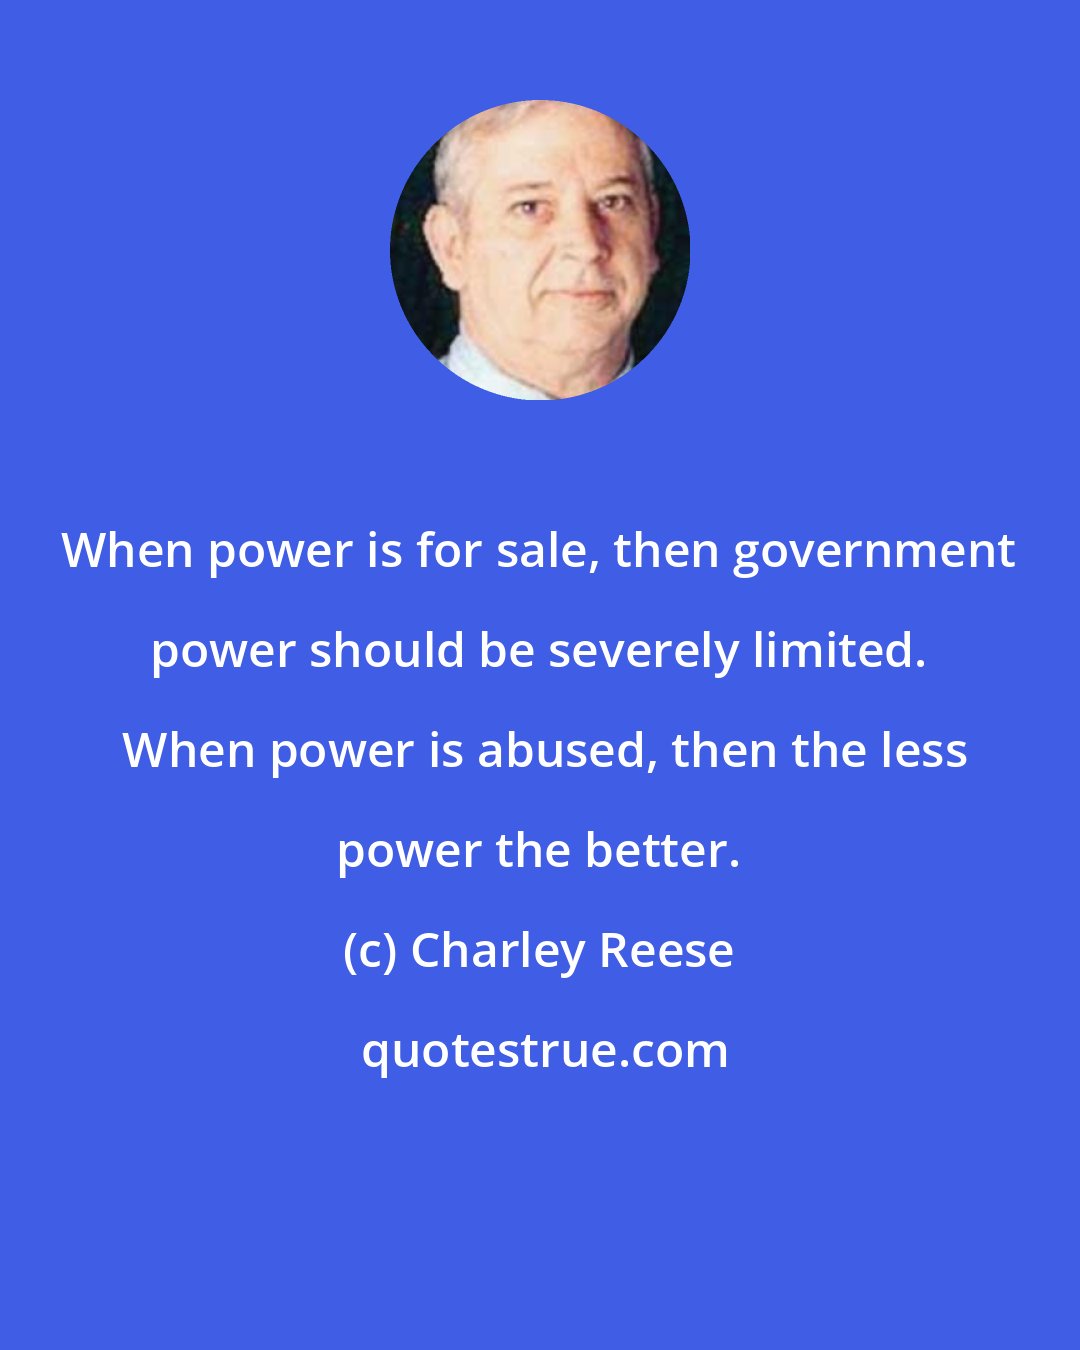 Charley Reese: When power is for sale, then government power should be severely limited.  When power is abused, then the less power the better.